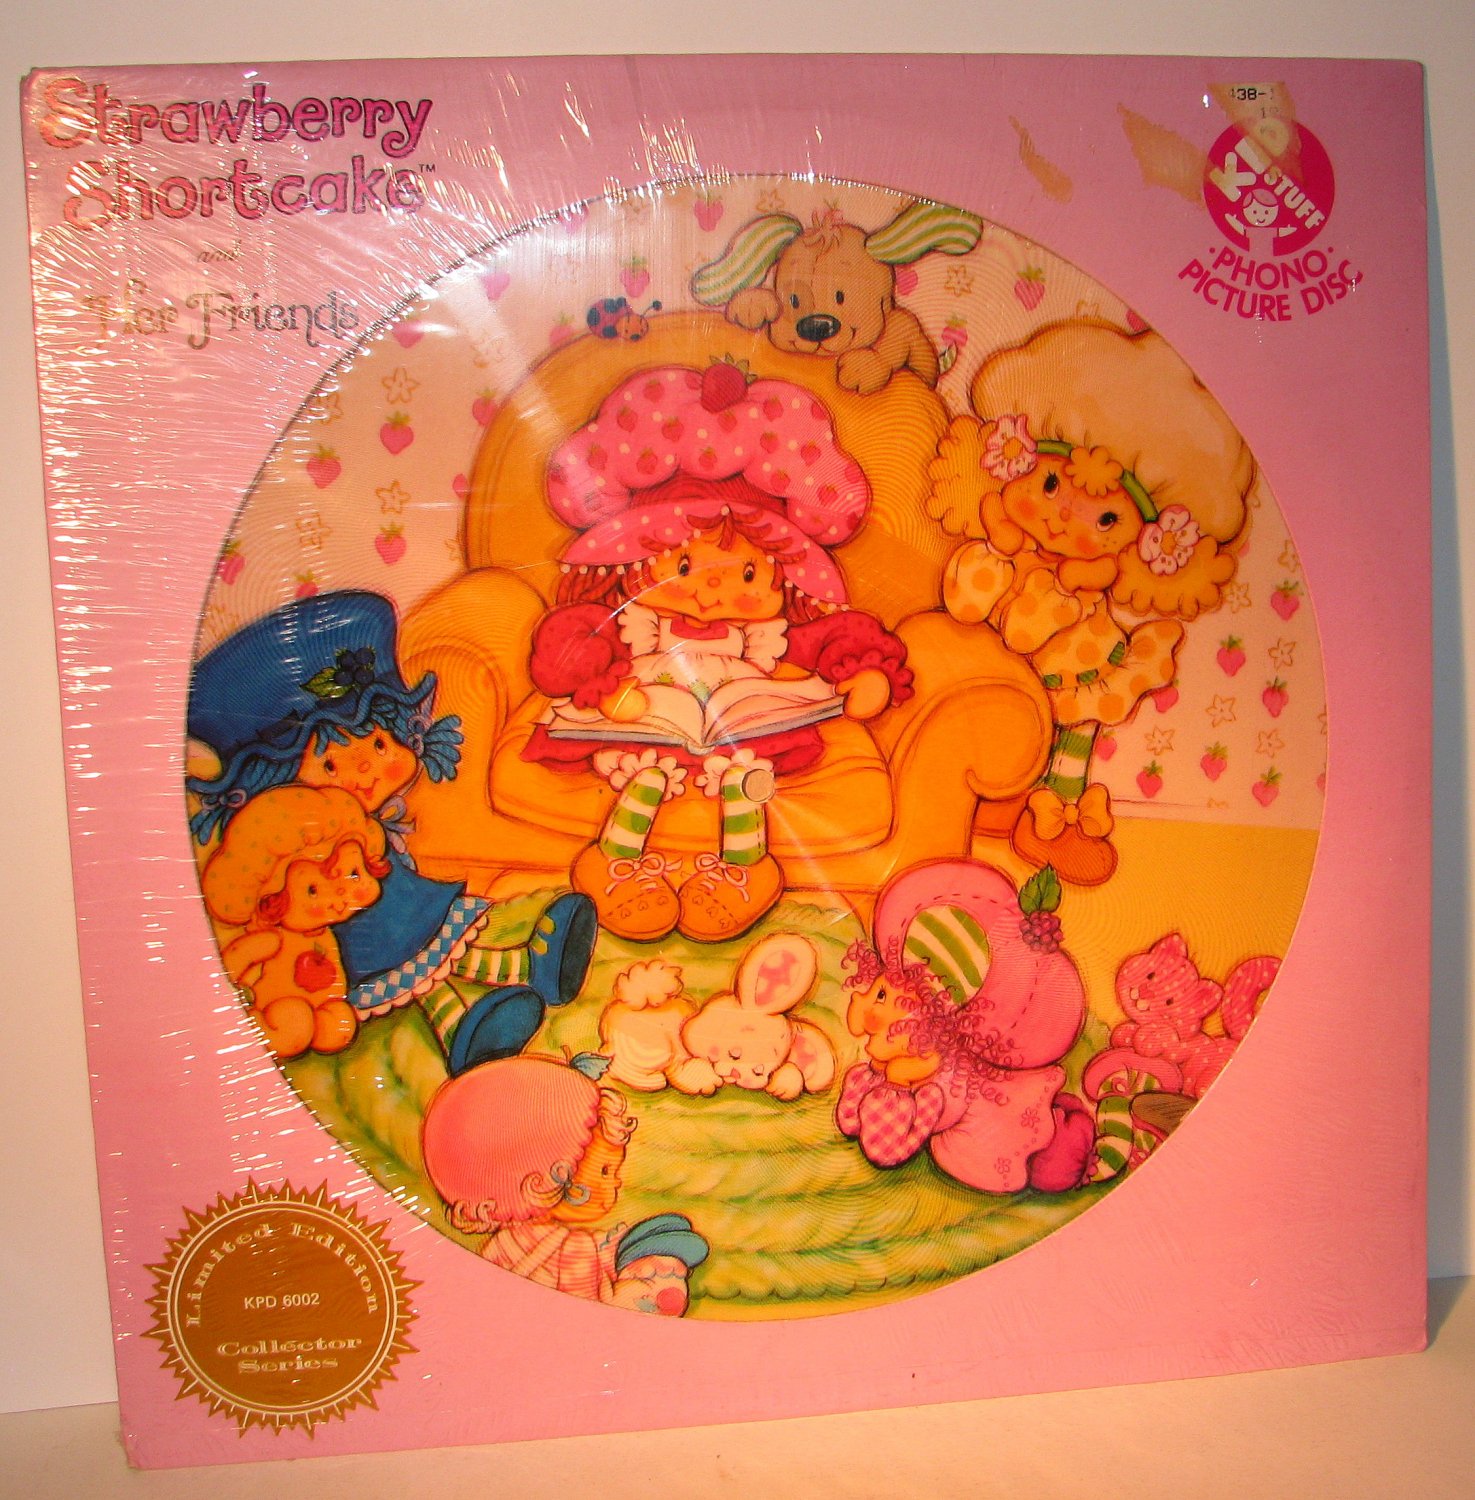 Strawberry Shortcake And Her Friends Sealed Picture Disc Vinyl Lp Record Children Kids